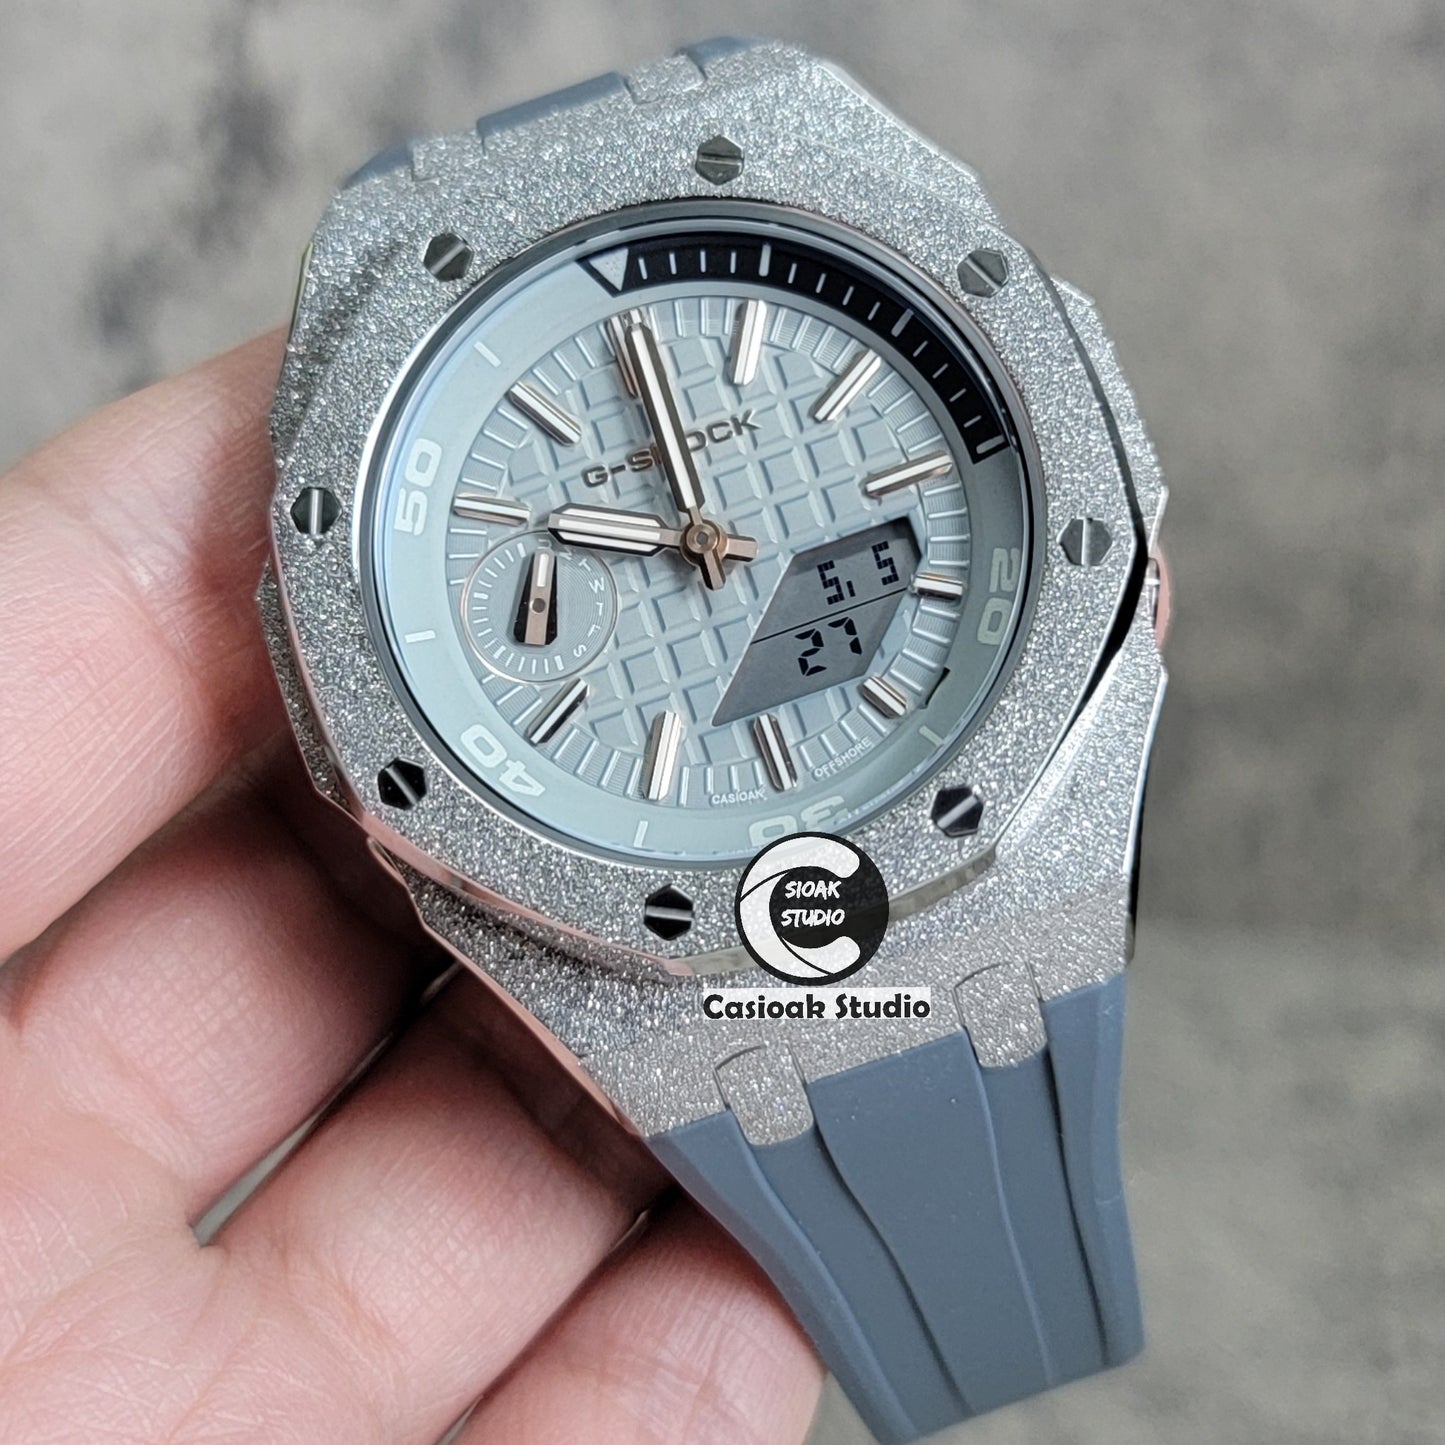 Casioak Mod Watch NEW Frosted Silver Case Gray Strap Gray Time Mark Gray Dial 44mm - Casioak Studio